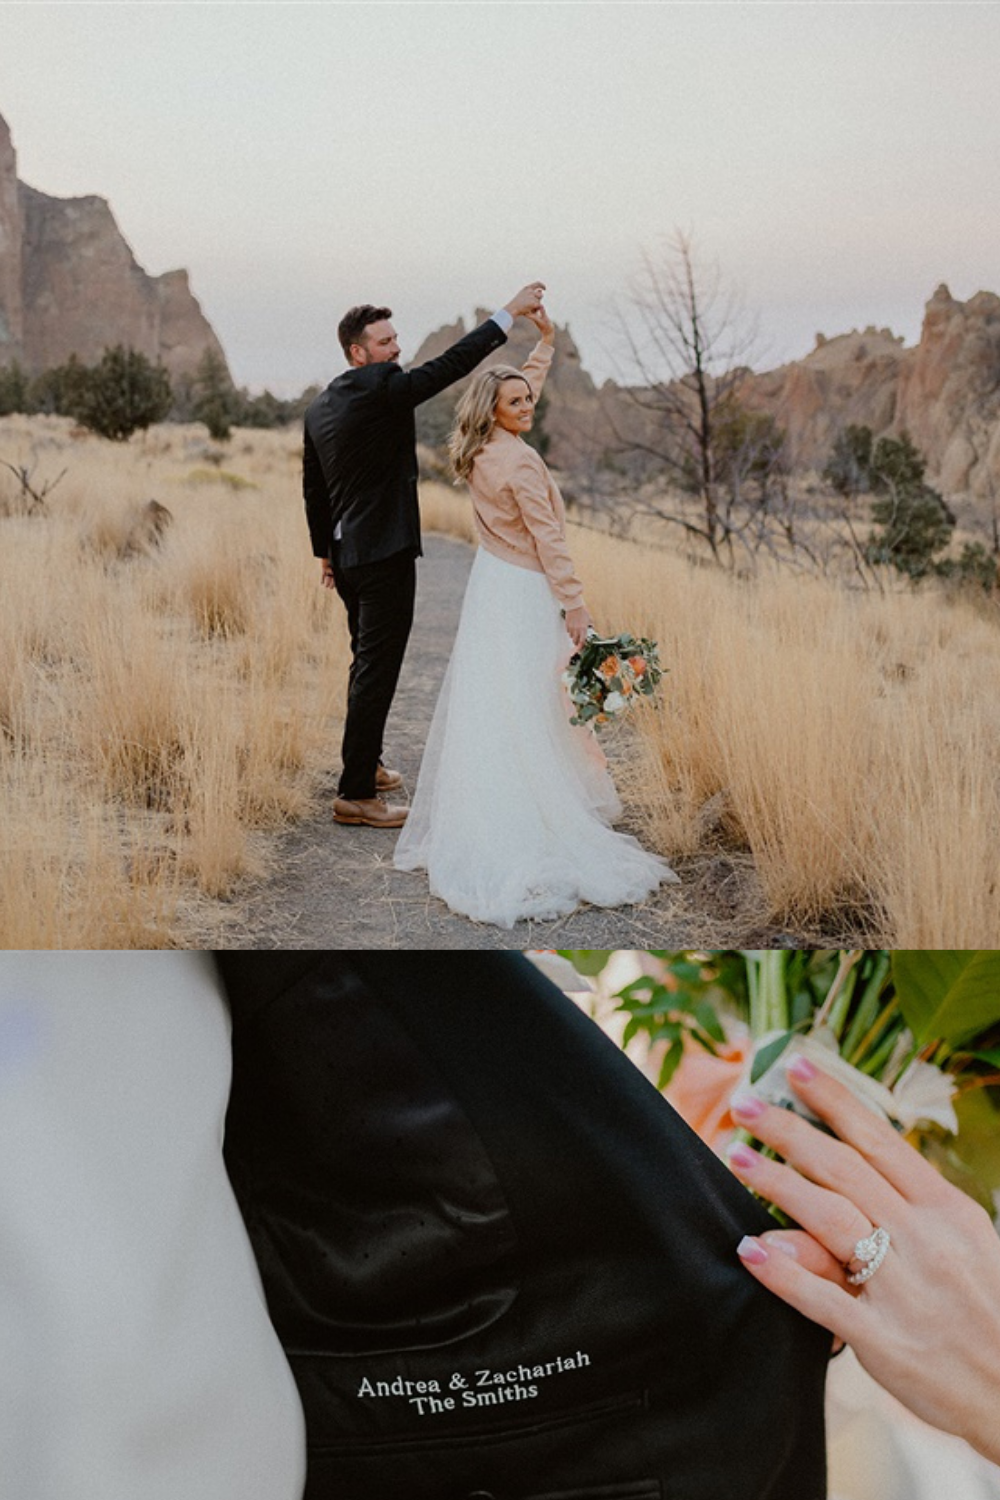 bride and groom dance in Smith Rock State park elopement inspiration with close up of groom style accent ideas and brides wedding rings | Sun River Elopement, Destination Elopement Photographer, Smith Rock Elopement Inspiration, Oregon Elopement ideas, PNW Fall Wedding Inspiration, Fall Outdoor Wedding Ideas,Fall Wedding Inspiration, PNW Outdoor Wedding Ideas | chelseaabril.com